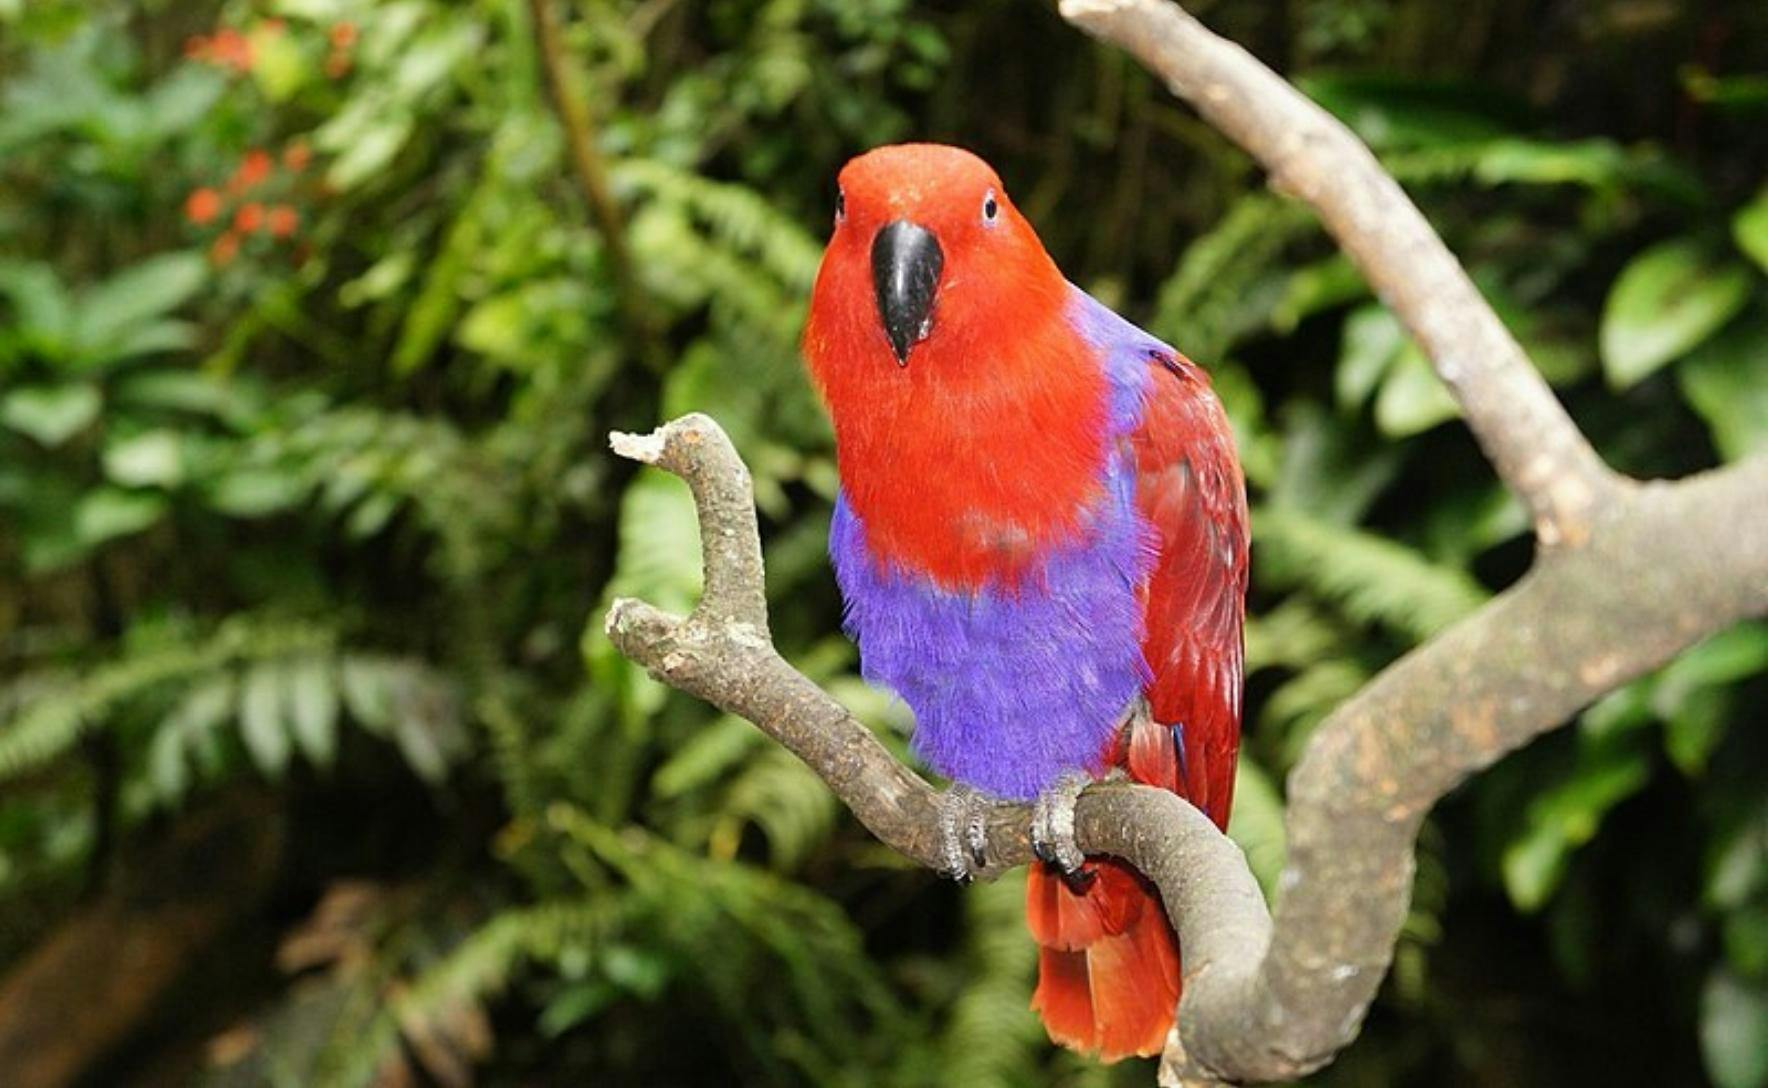 A red parrot with a purple chest sits on a branch with green foliage in the background